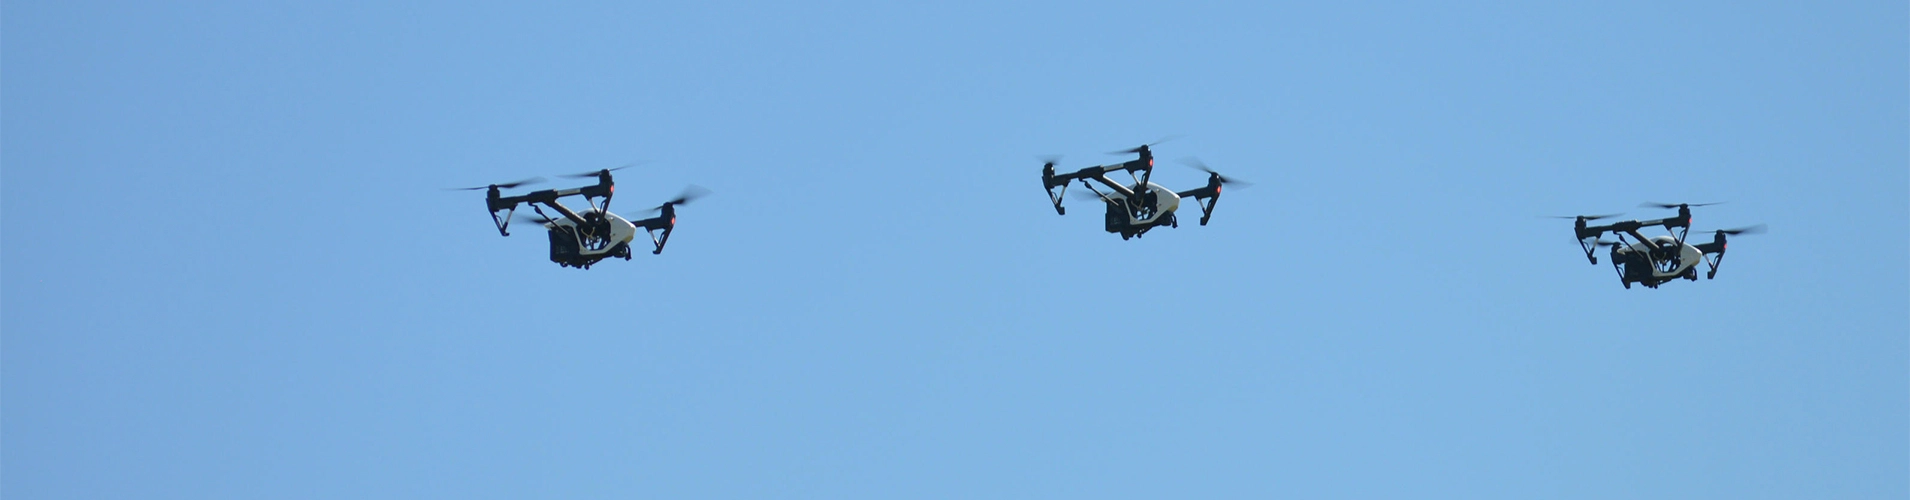 Drones: useful tools, toys or weapons?